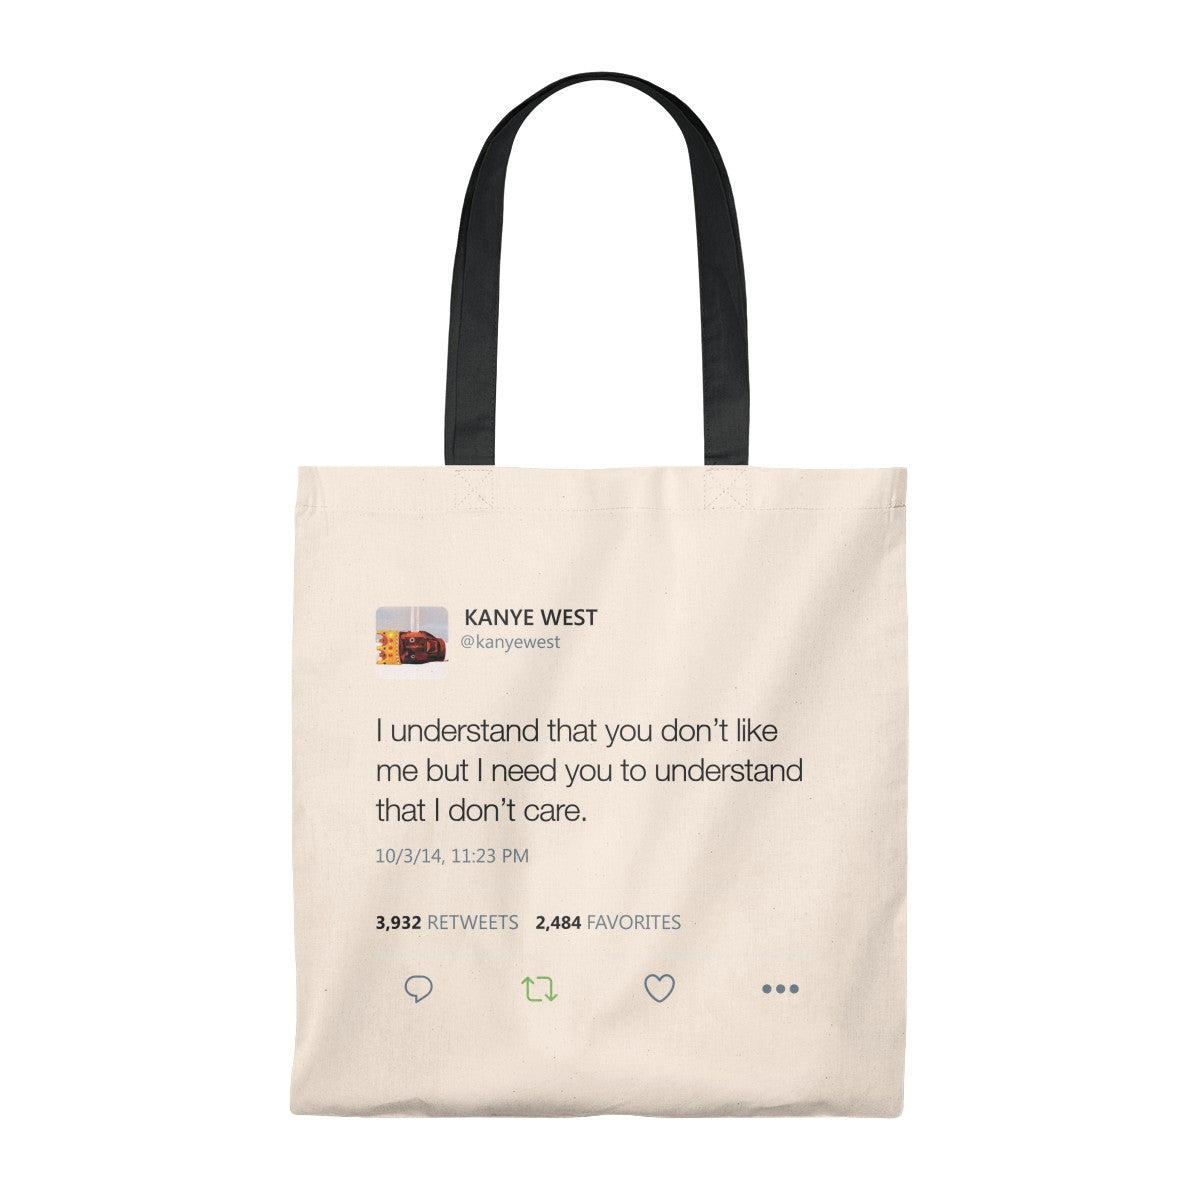 I Understand That You Don't Like Me But I Need You To Understand That I DonT Care Kanye West Tweet Tote Bag-Natural/Black-Archethype